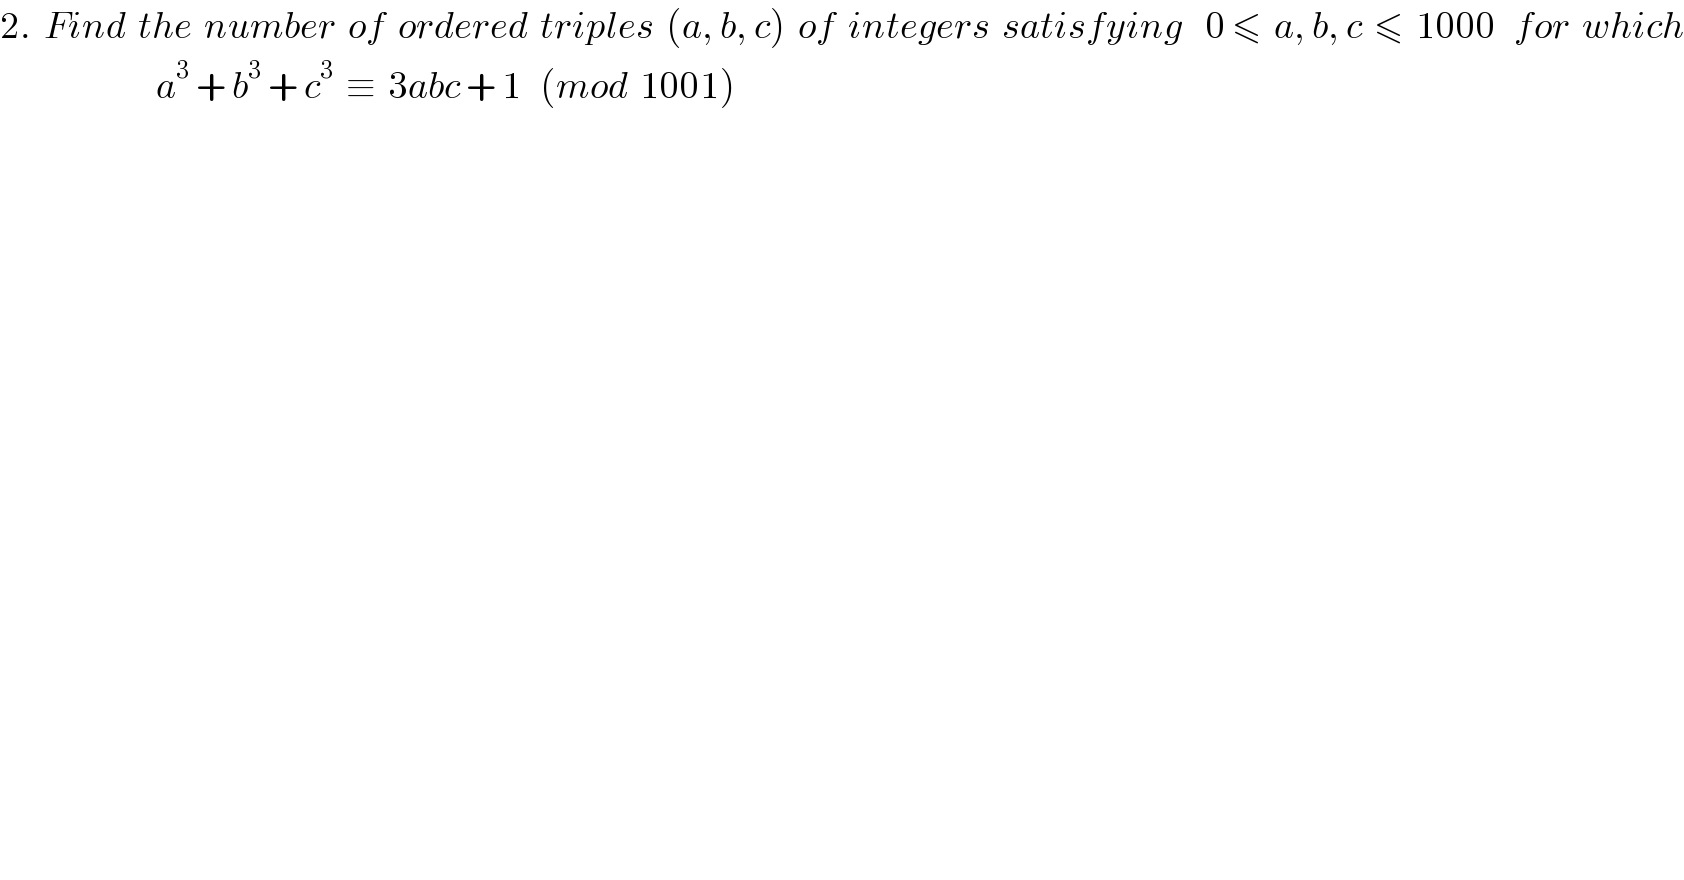 2.  Find  the  number  of  ordered  triples  (a, b, c)  of  integers  satisfying    0 ≤  a, b, c  ≤  1000   for  which                            a^3  + b^3  + c^3   ≡  3abc + 1   (mod  1001)   